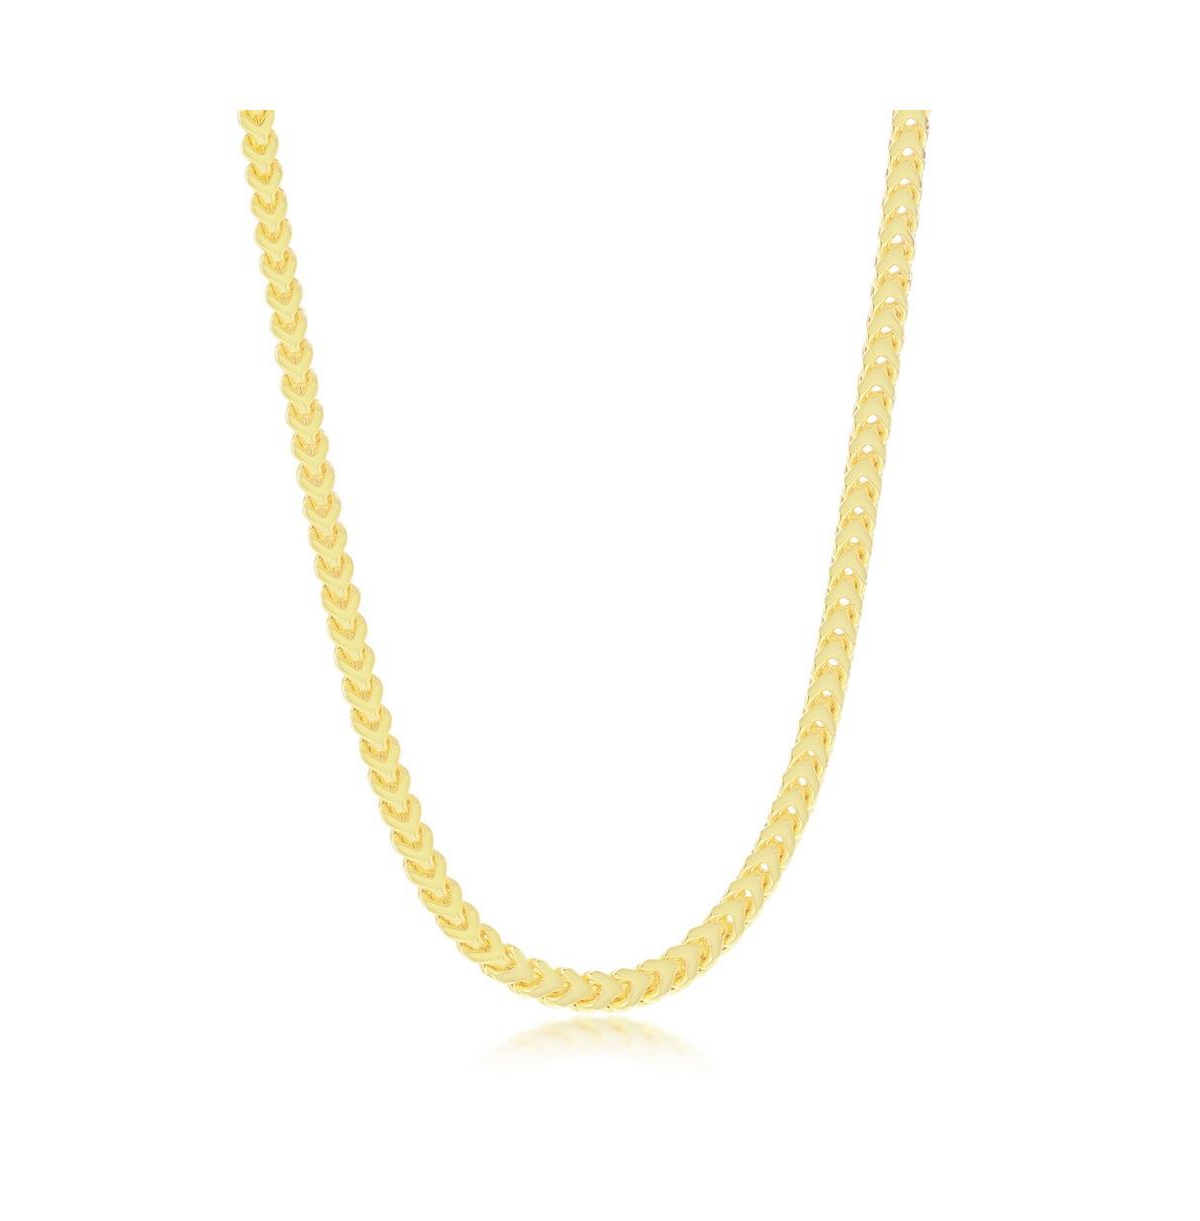 Franco Chain 3mm Sterling Silver or Gold Plated Over Sterling Silver 24" Necklace - Gold